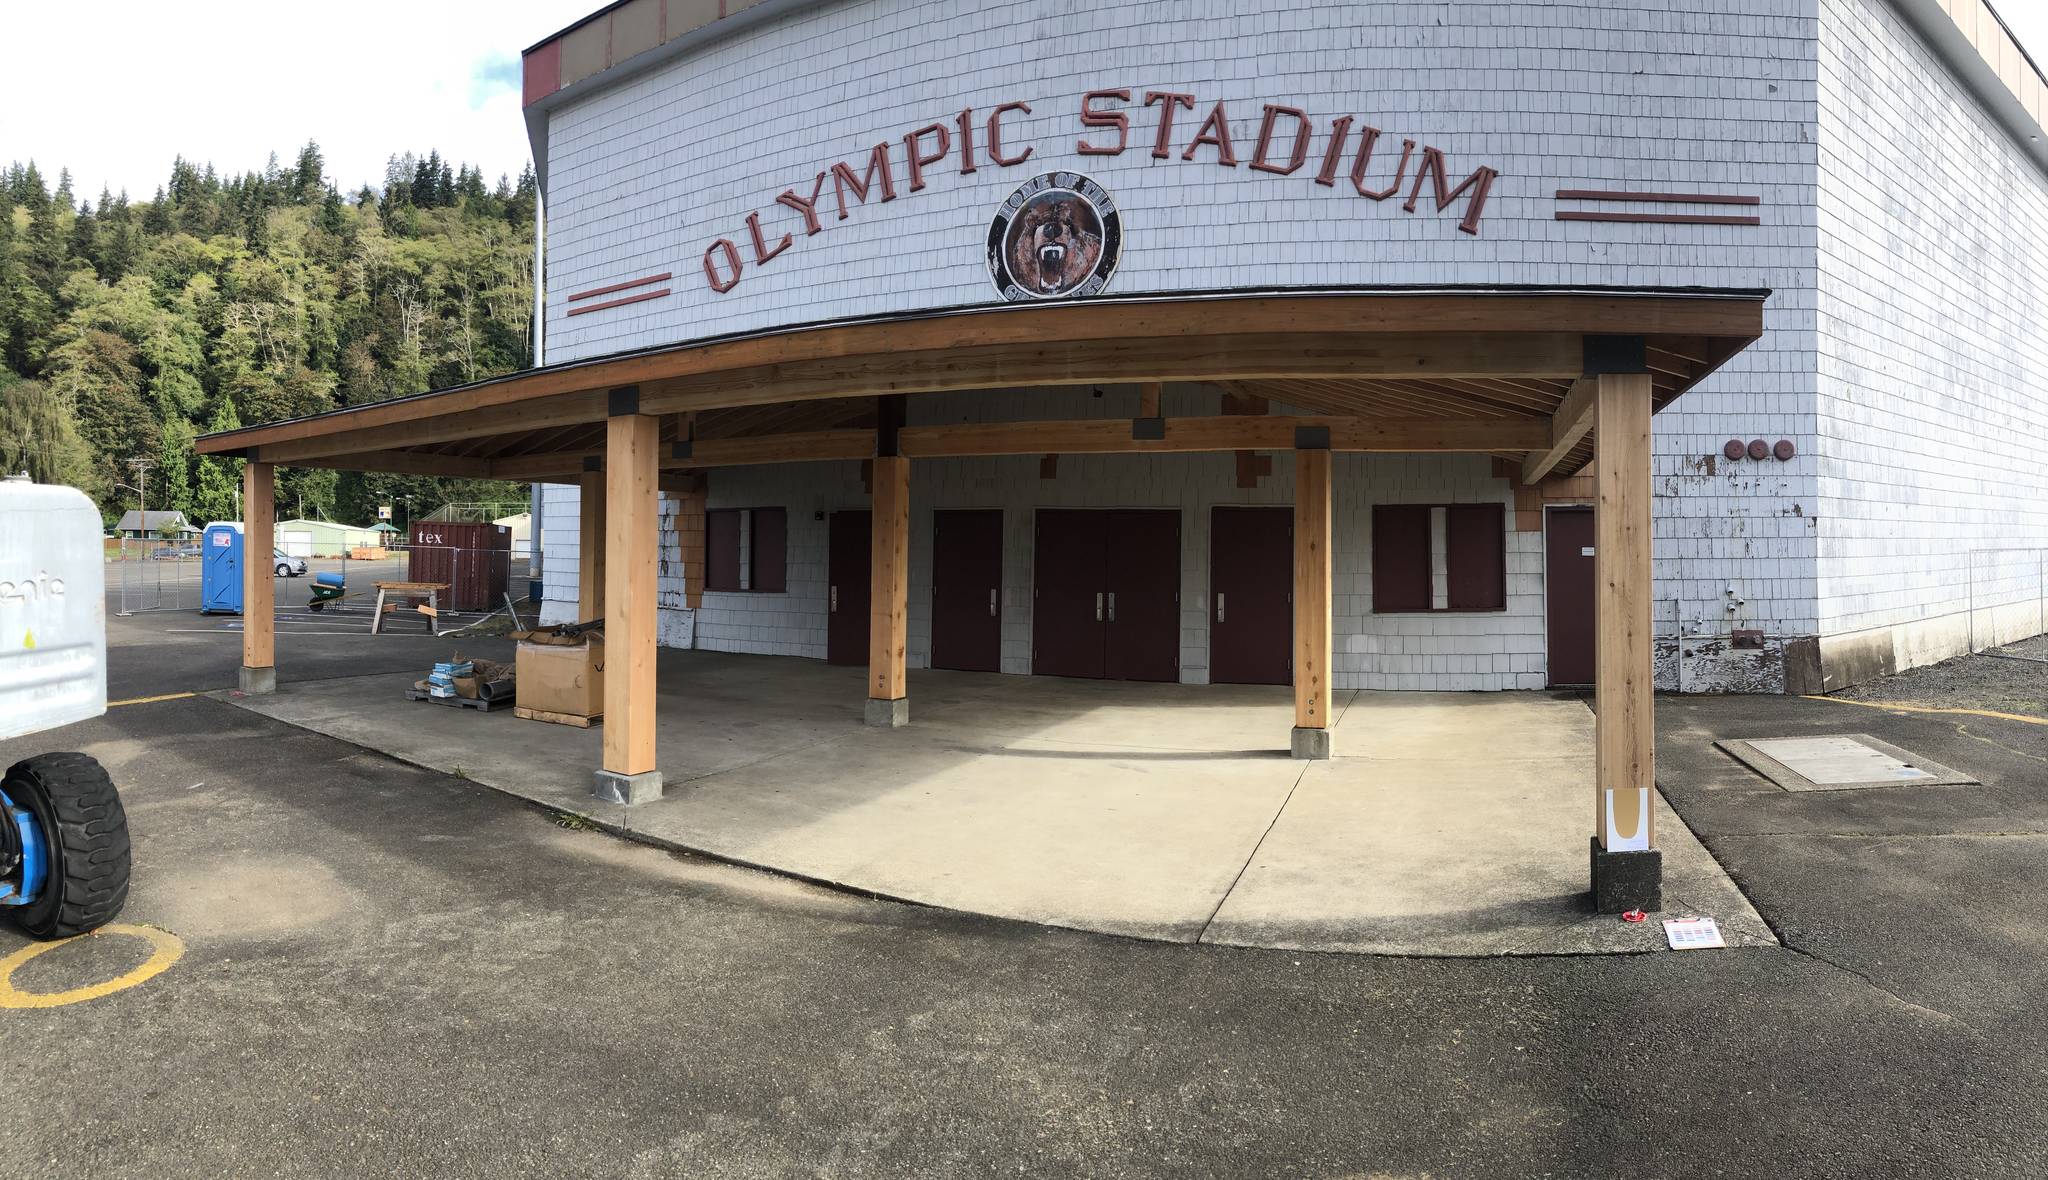 A new front entry for Olympic Stadium was part of earlier renovations. (Brian Shay photo)